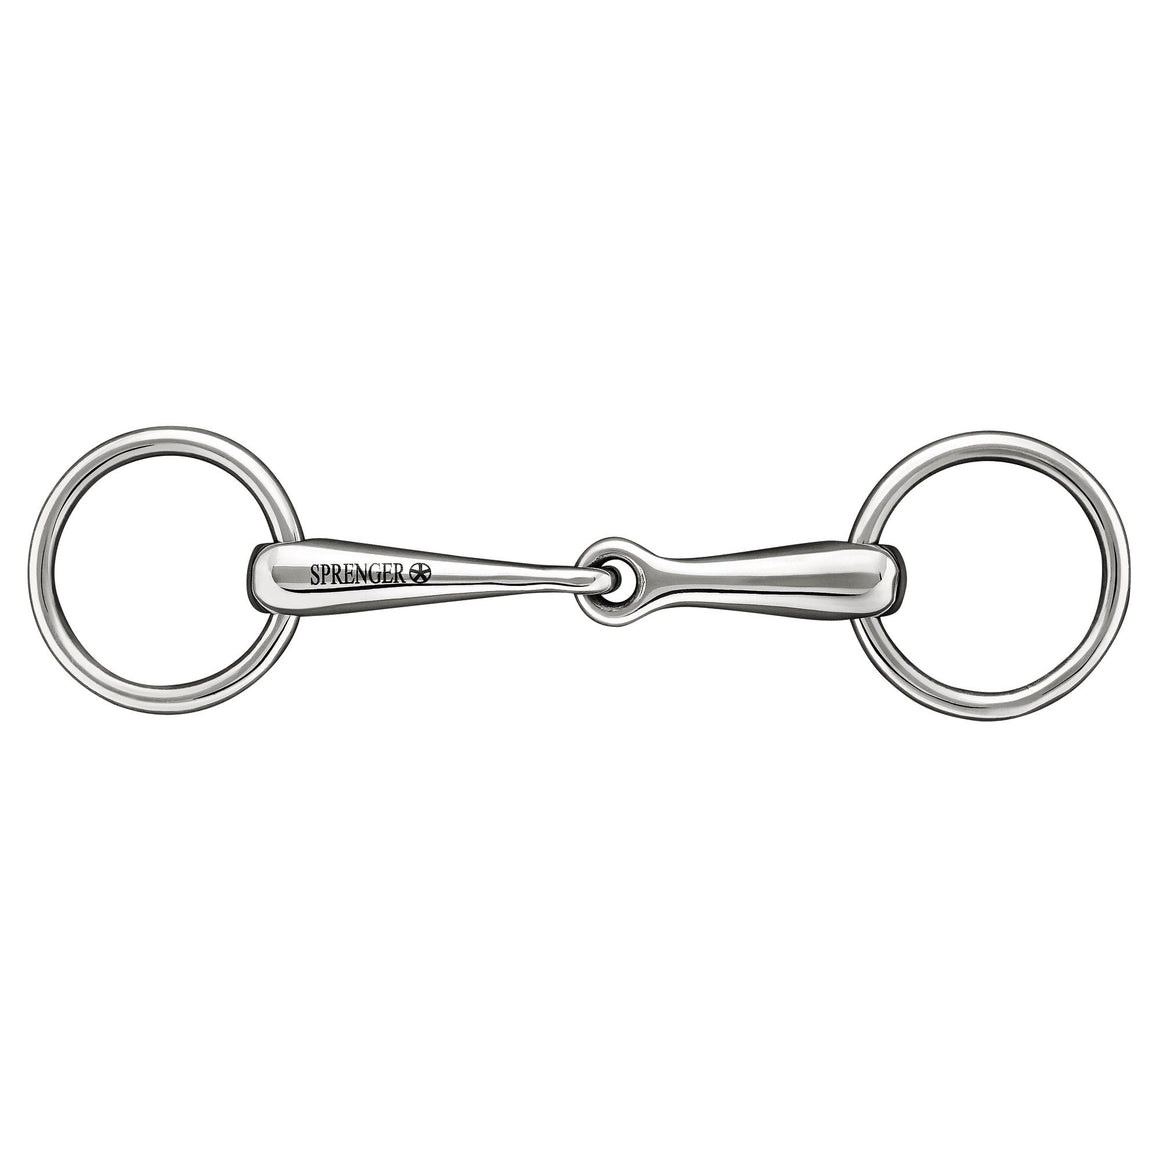 Sprenger PONY Loose Ring Snaffle Single Joint 40112